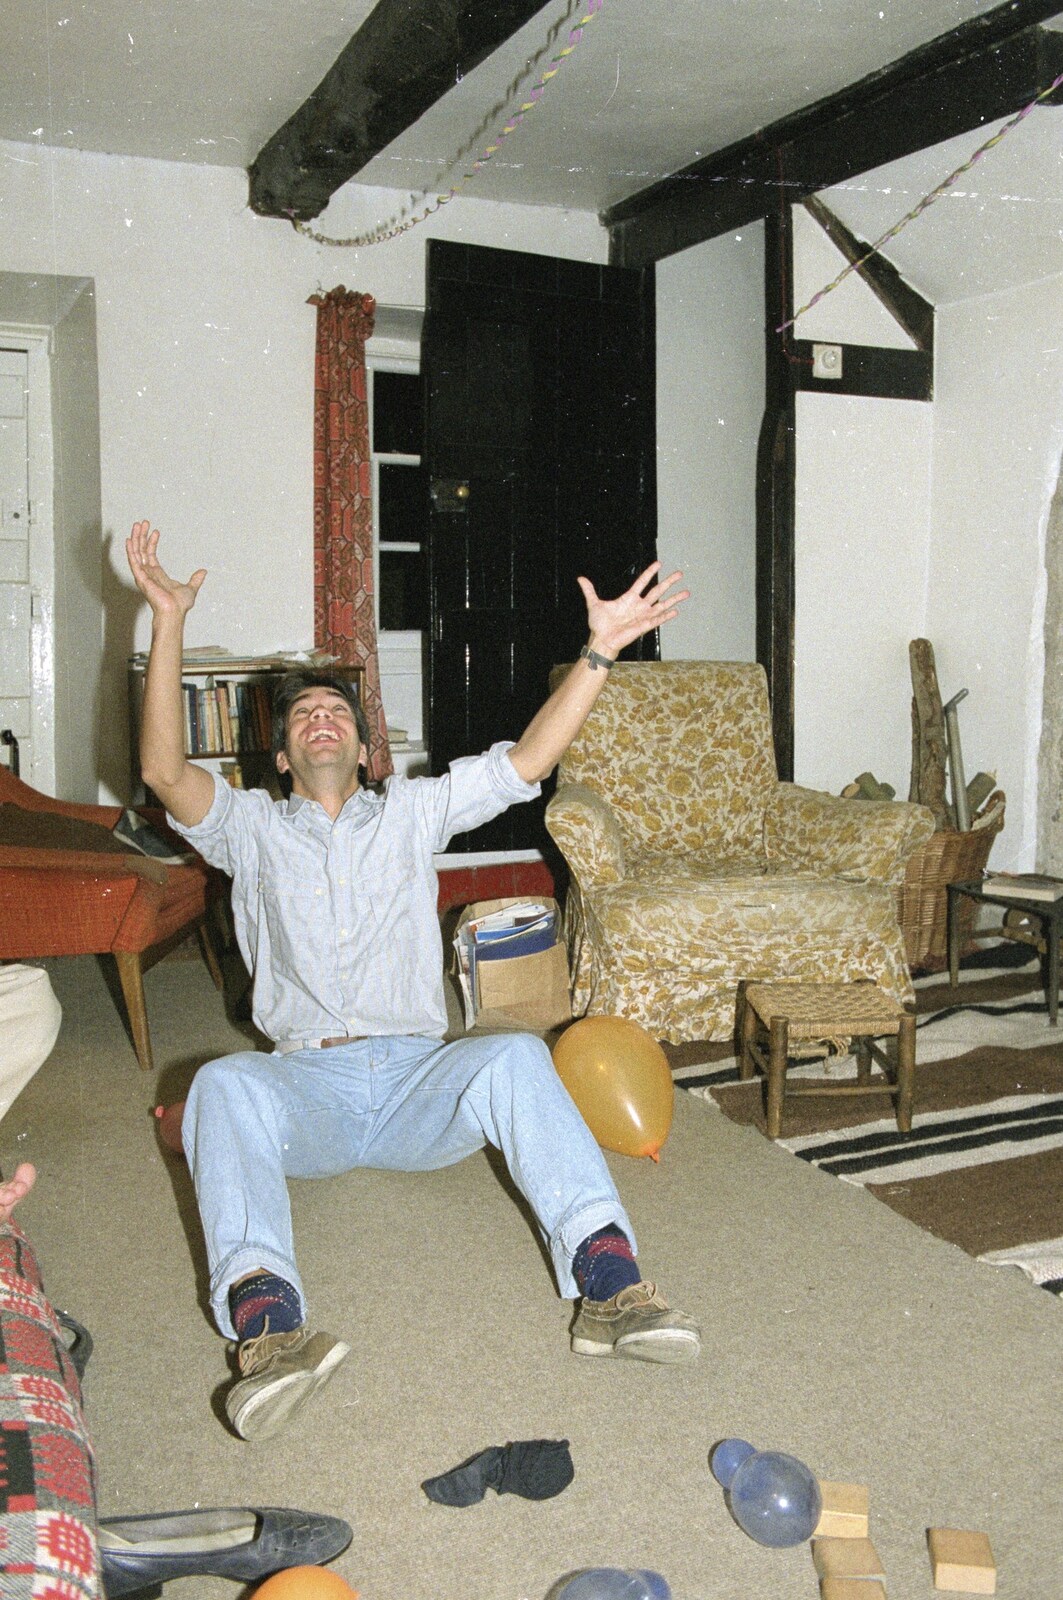 Liz's Party, Abergavenny, Monmouthshire, Wales - 4th August 1990: Nigel does some sort of Cossack dancing